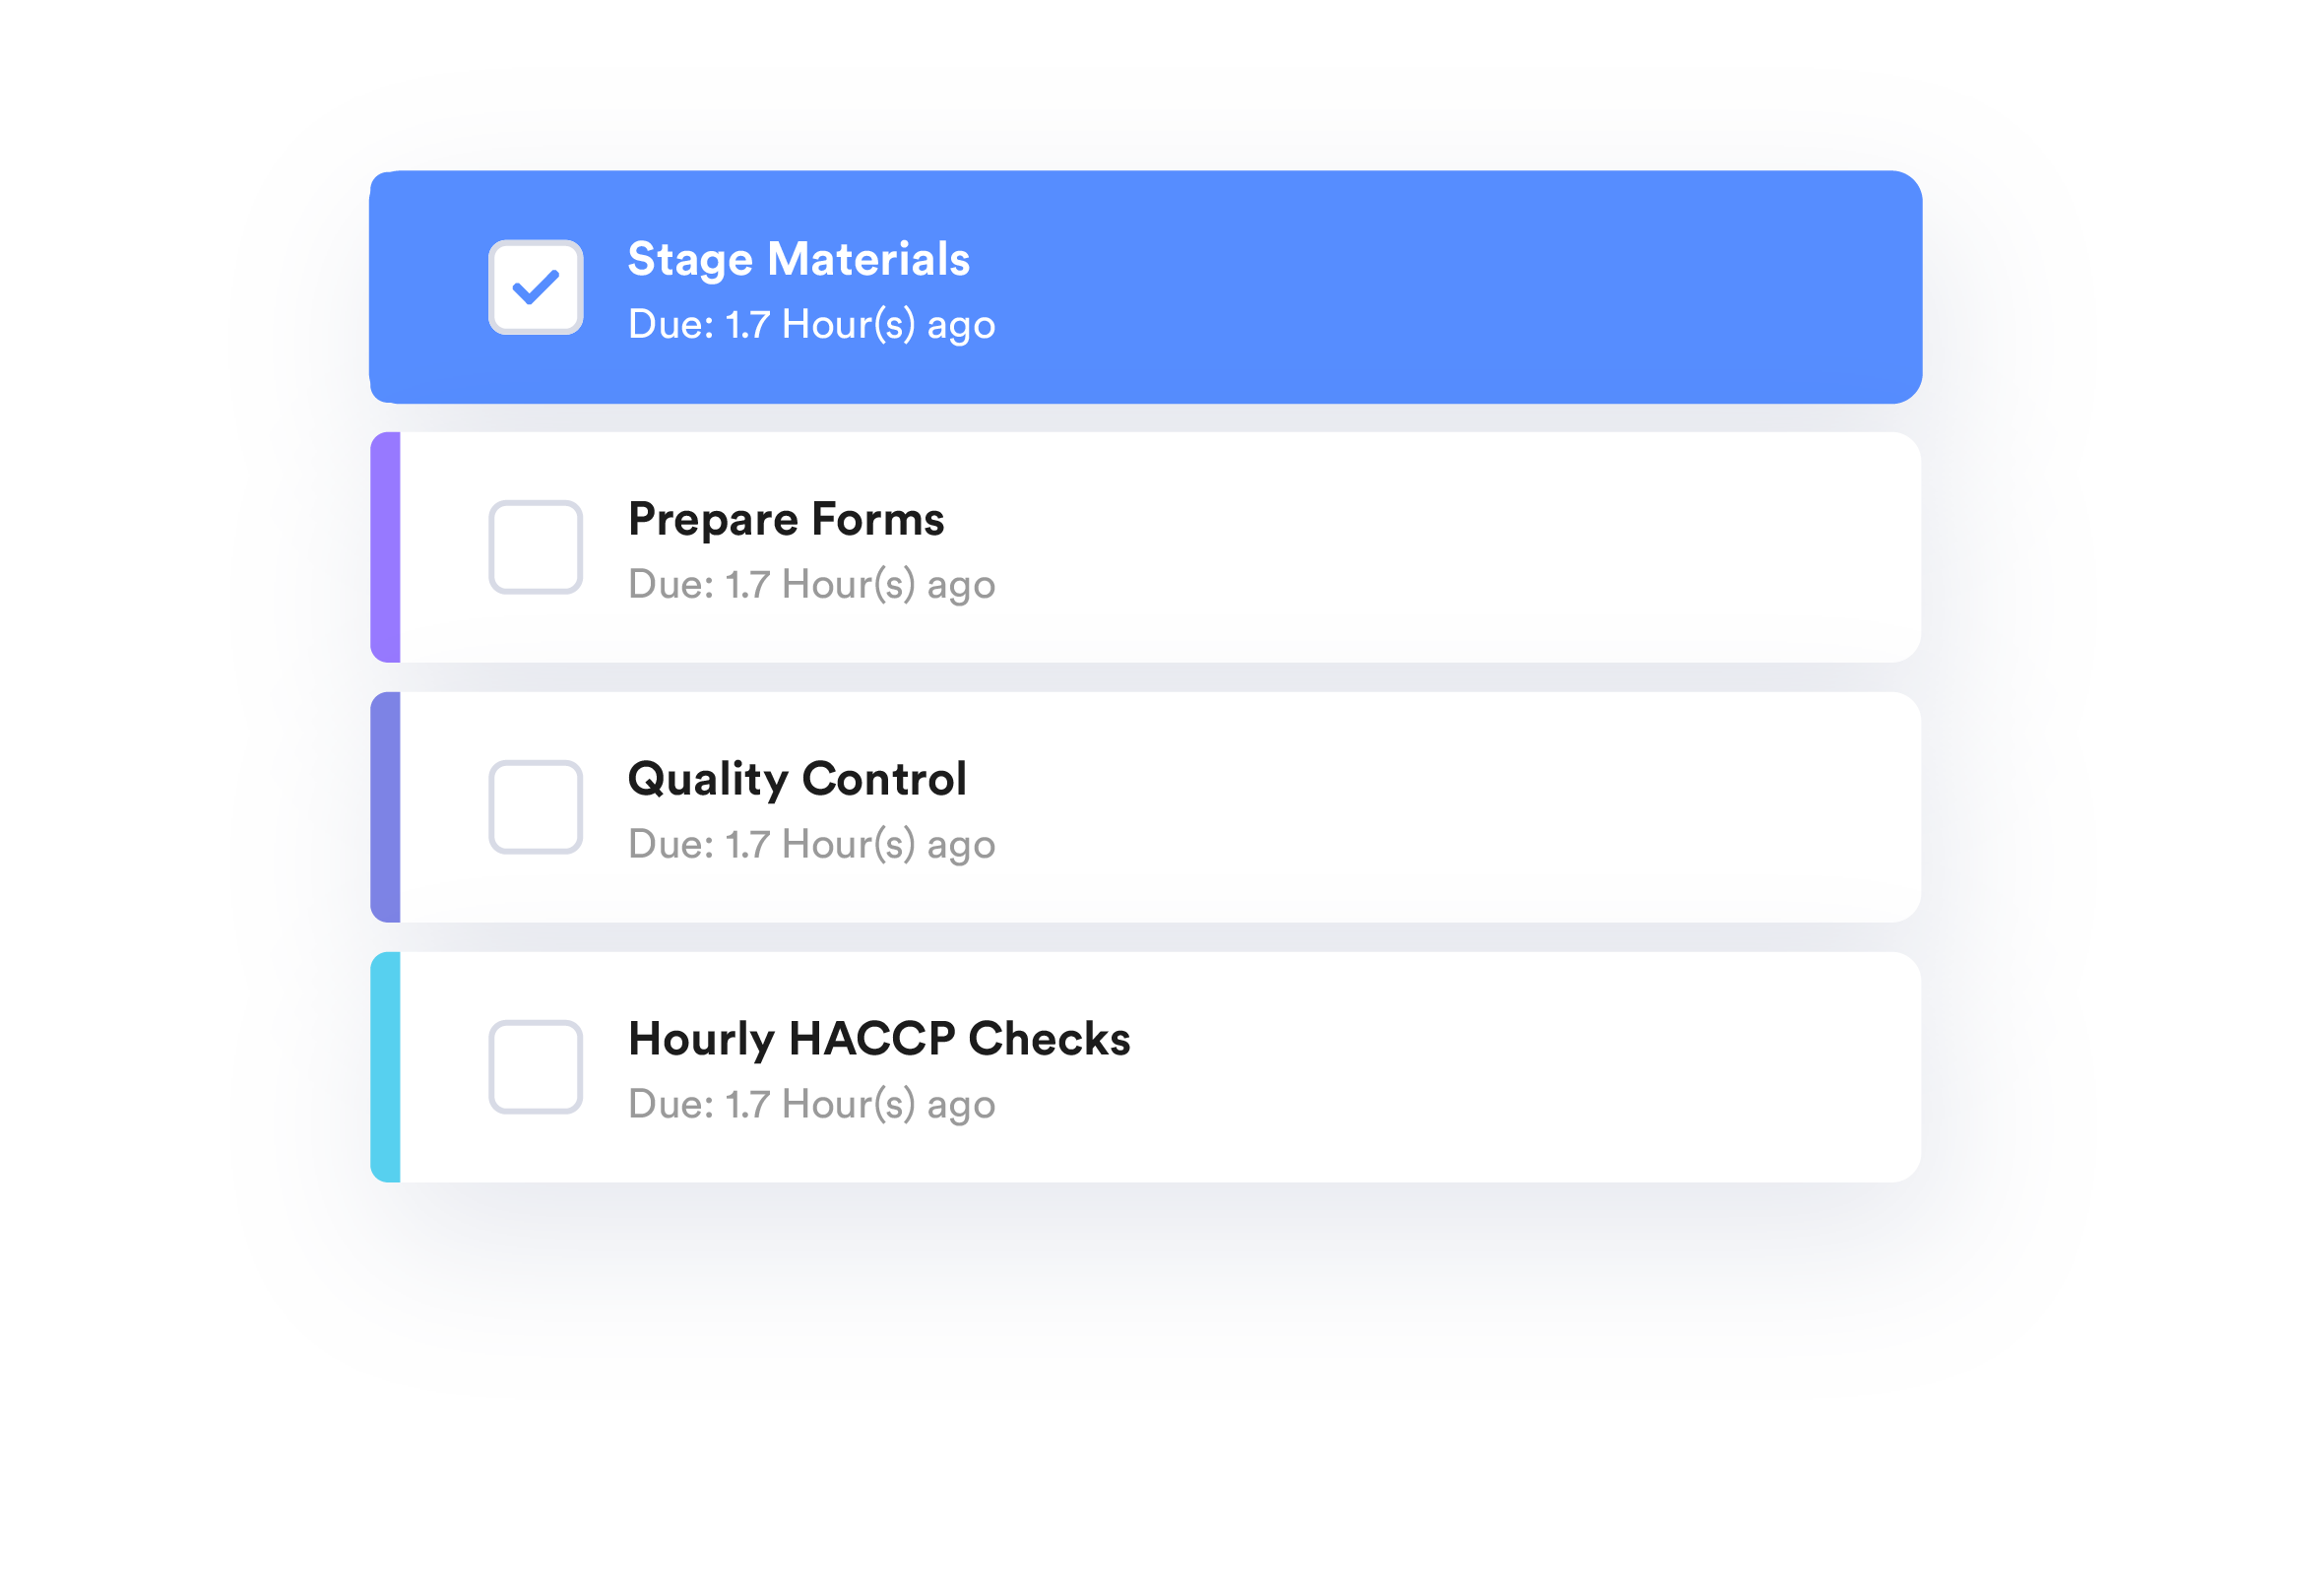 Schedule tasks using TrakSYS quality management solutions